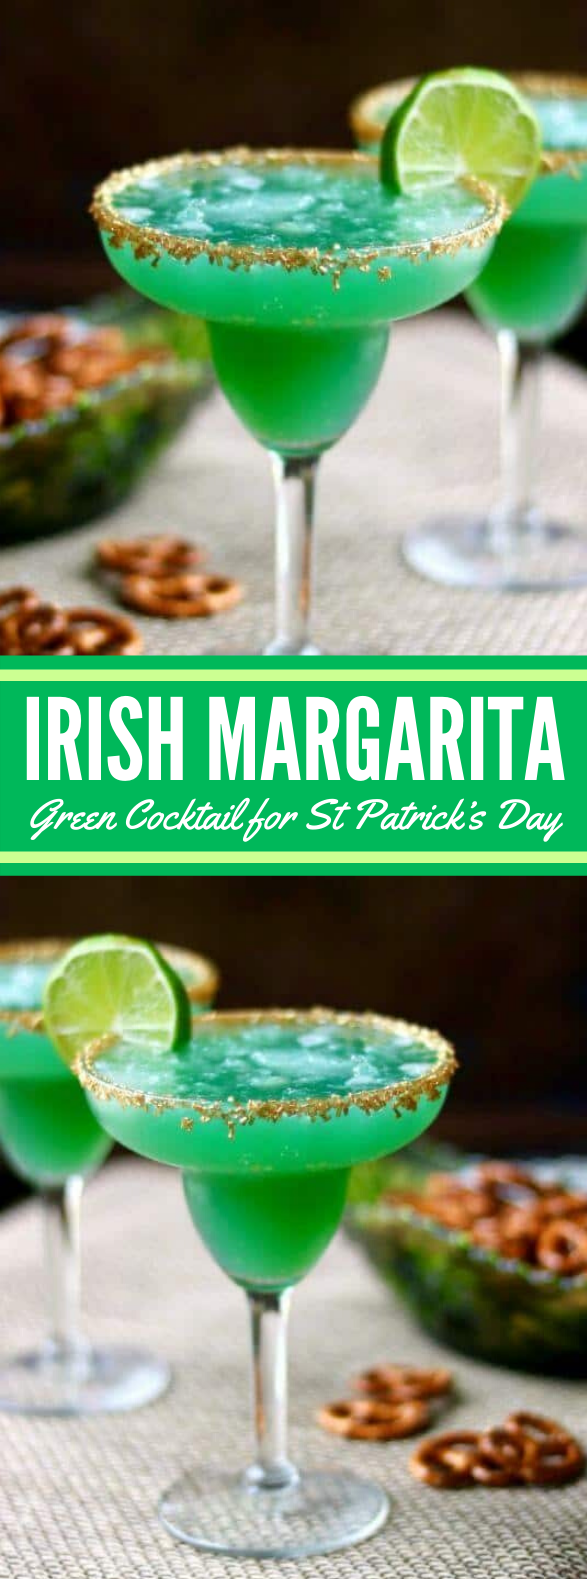 Irish Margarita Recipe: Green Cocktail for St Patrick’s Day #drinks #partydrink